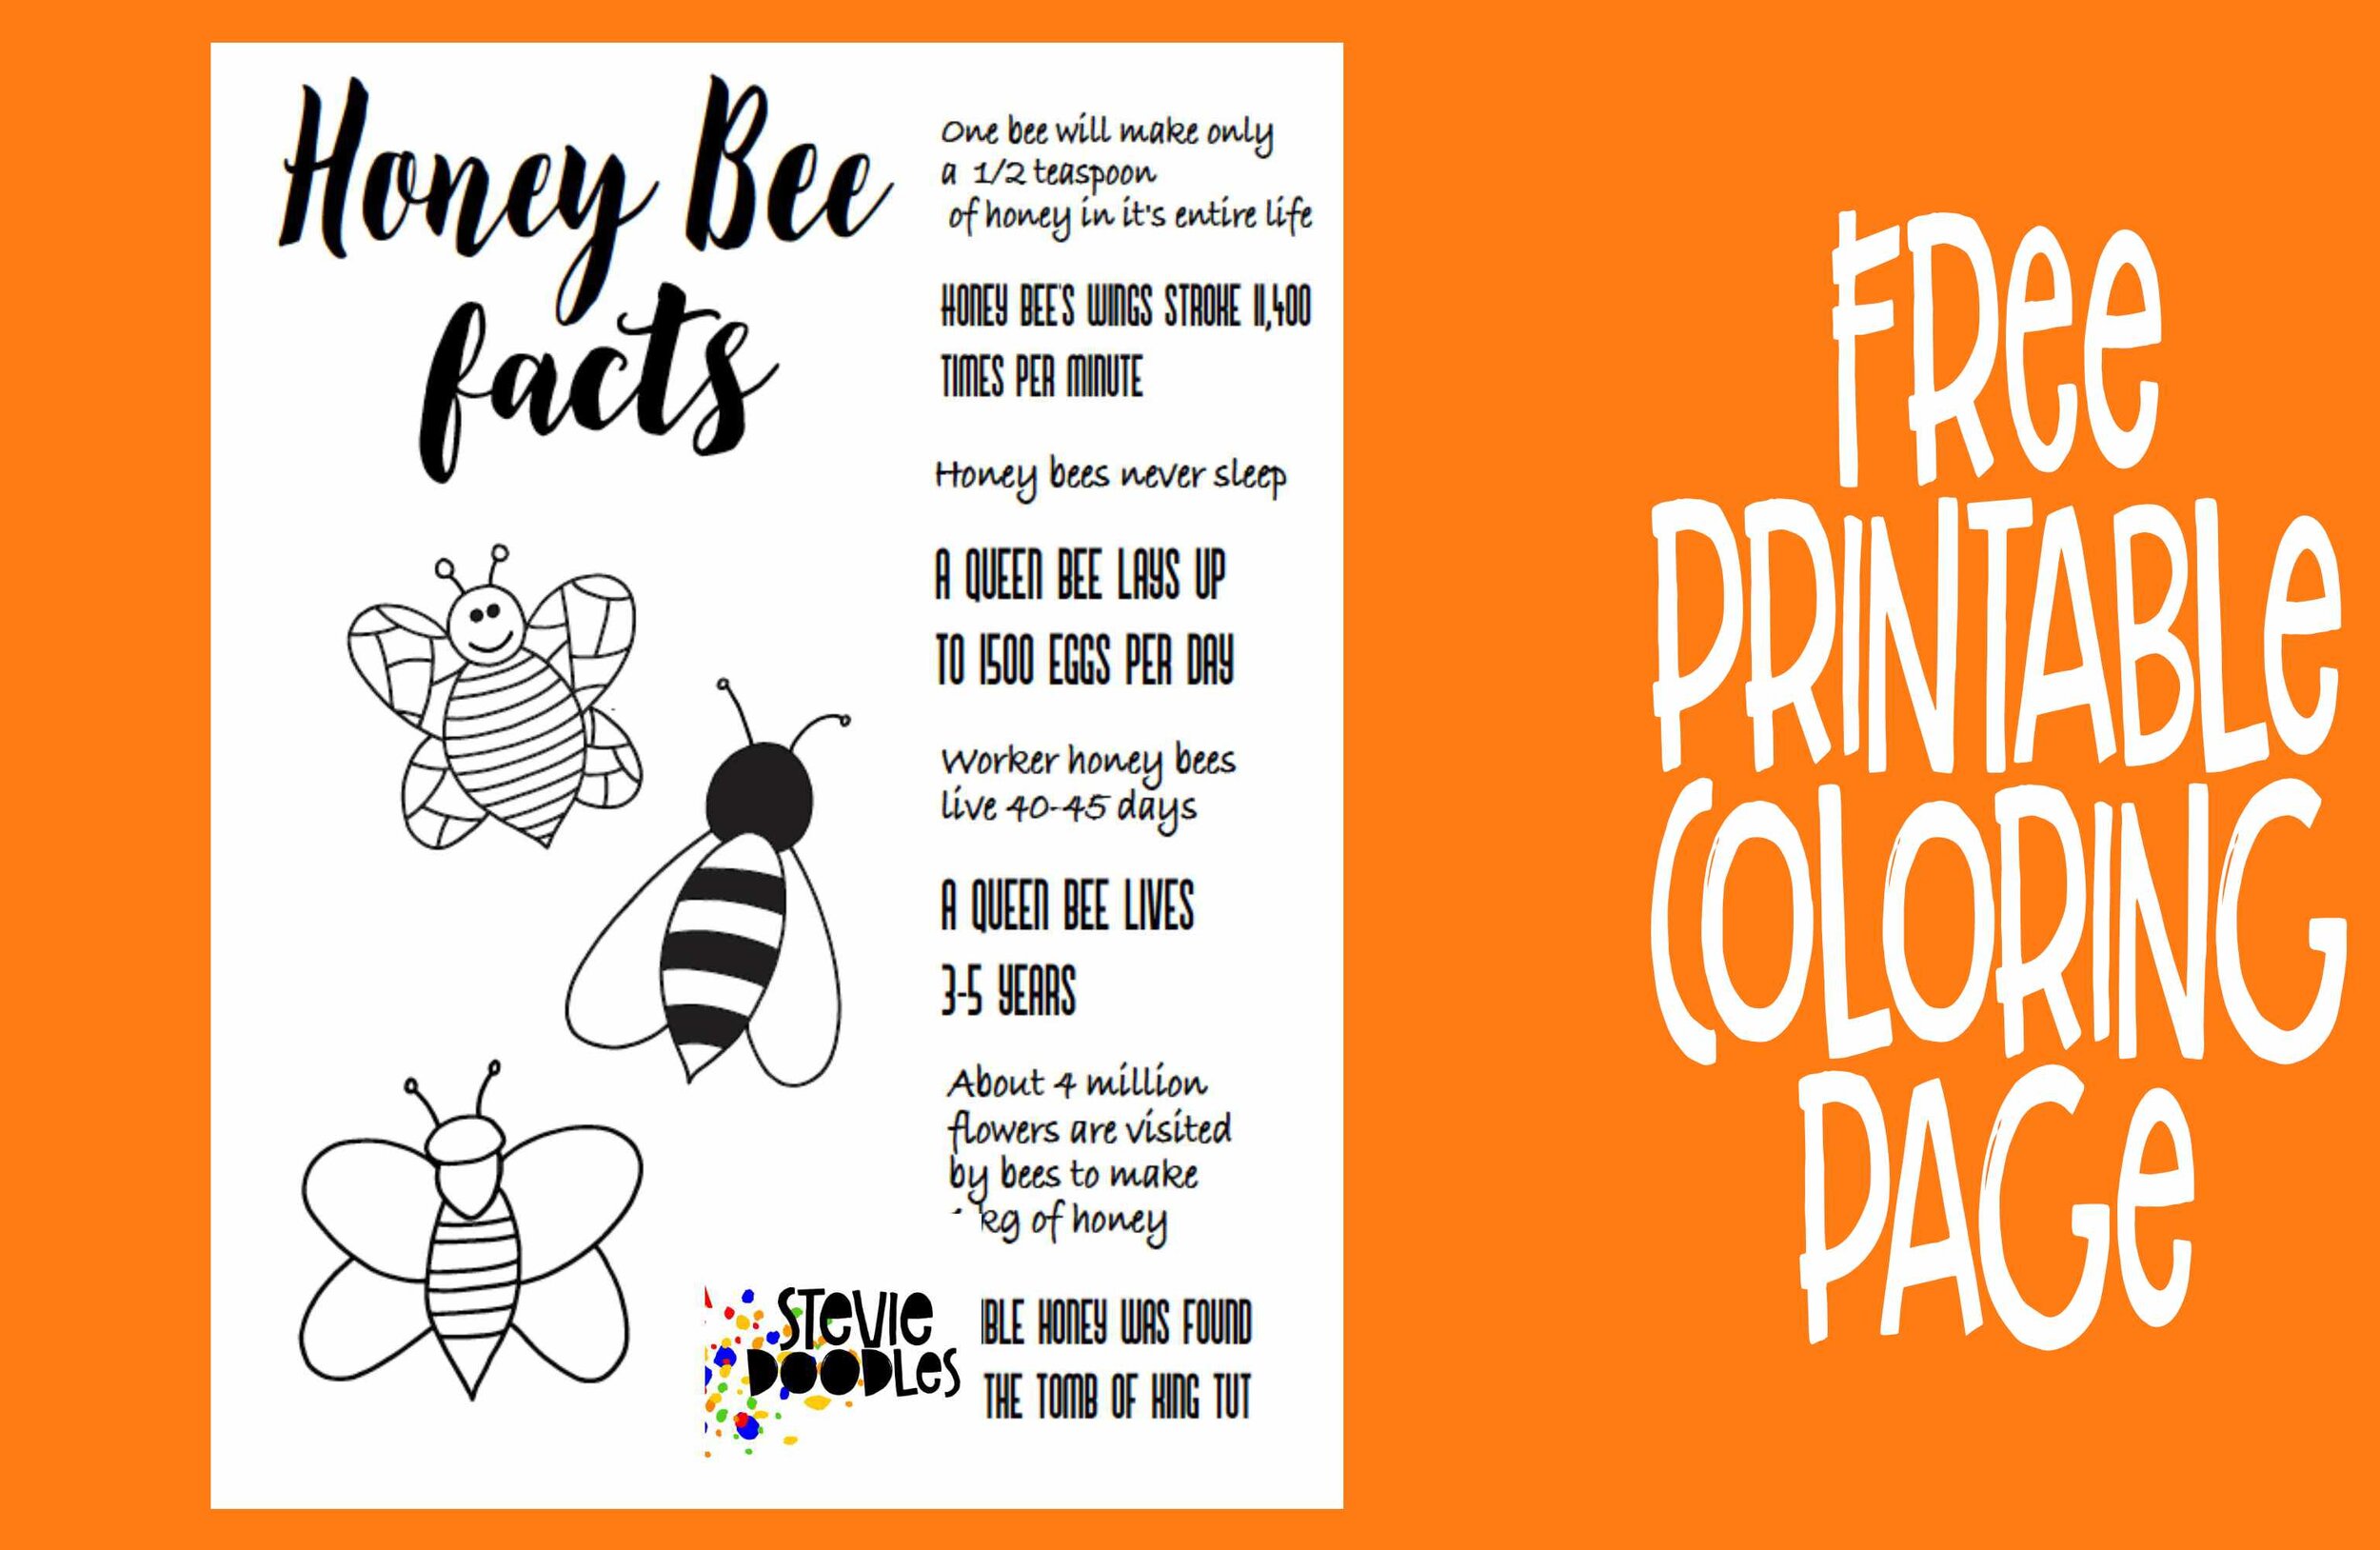 HONEY BEE FACTS free printable coloring page